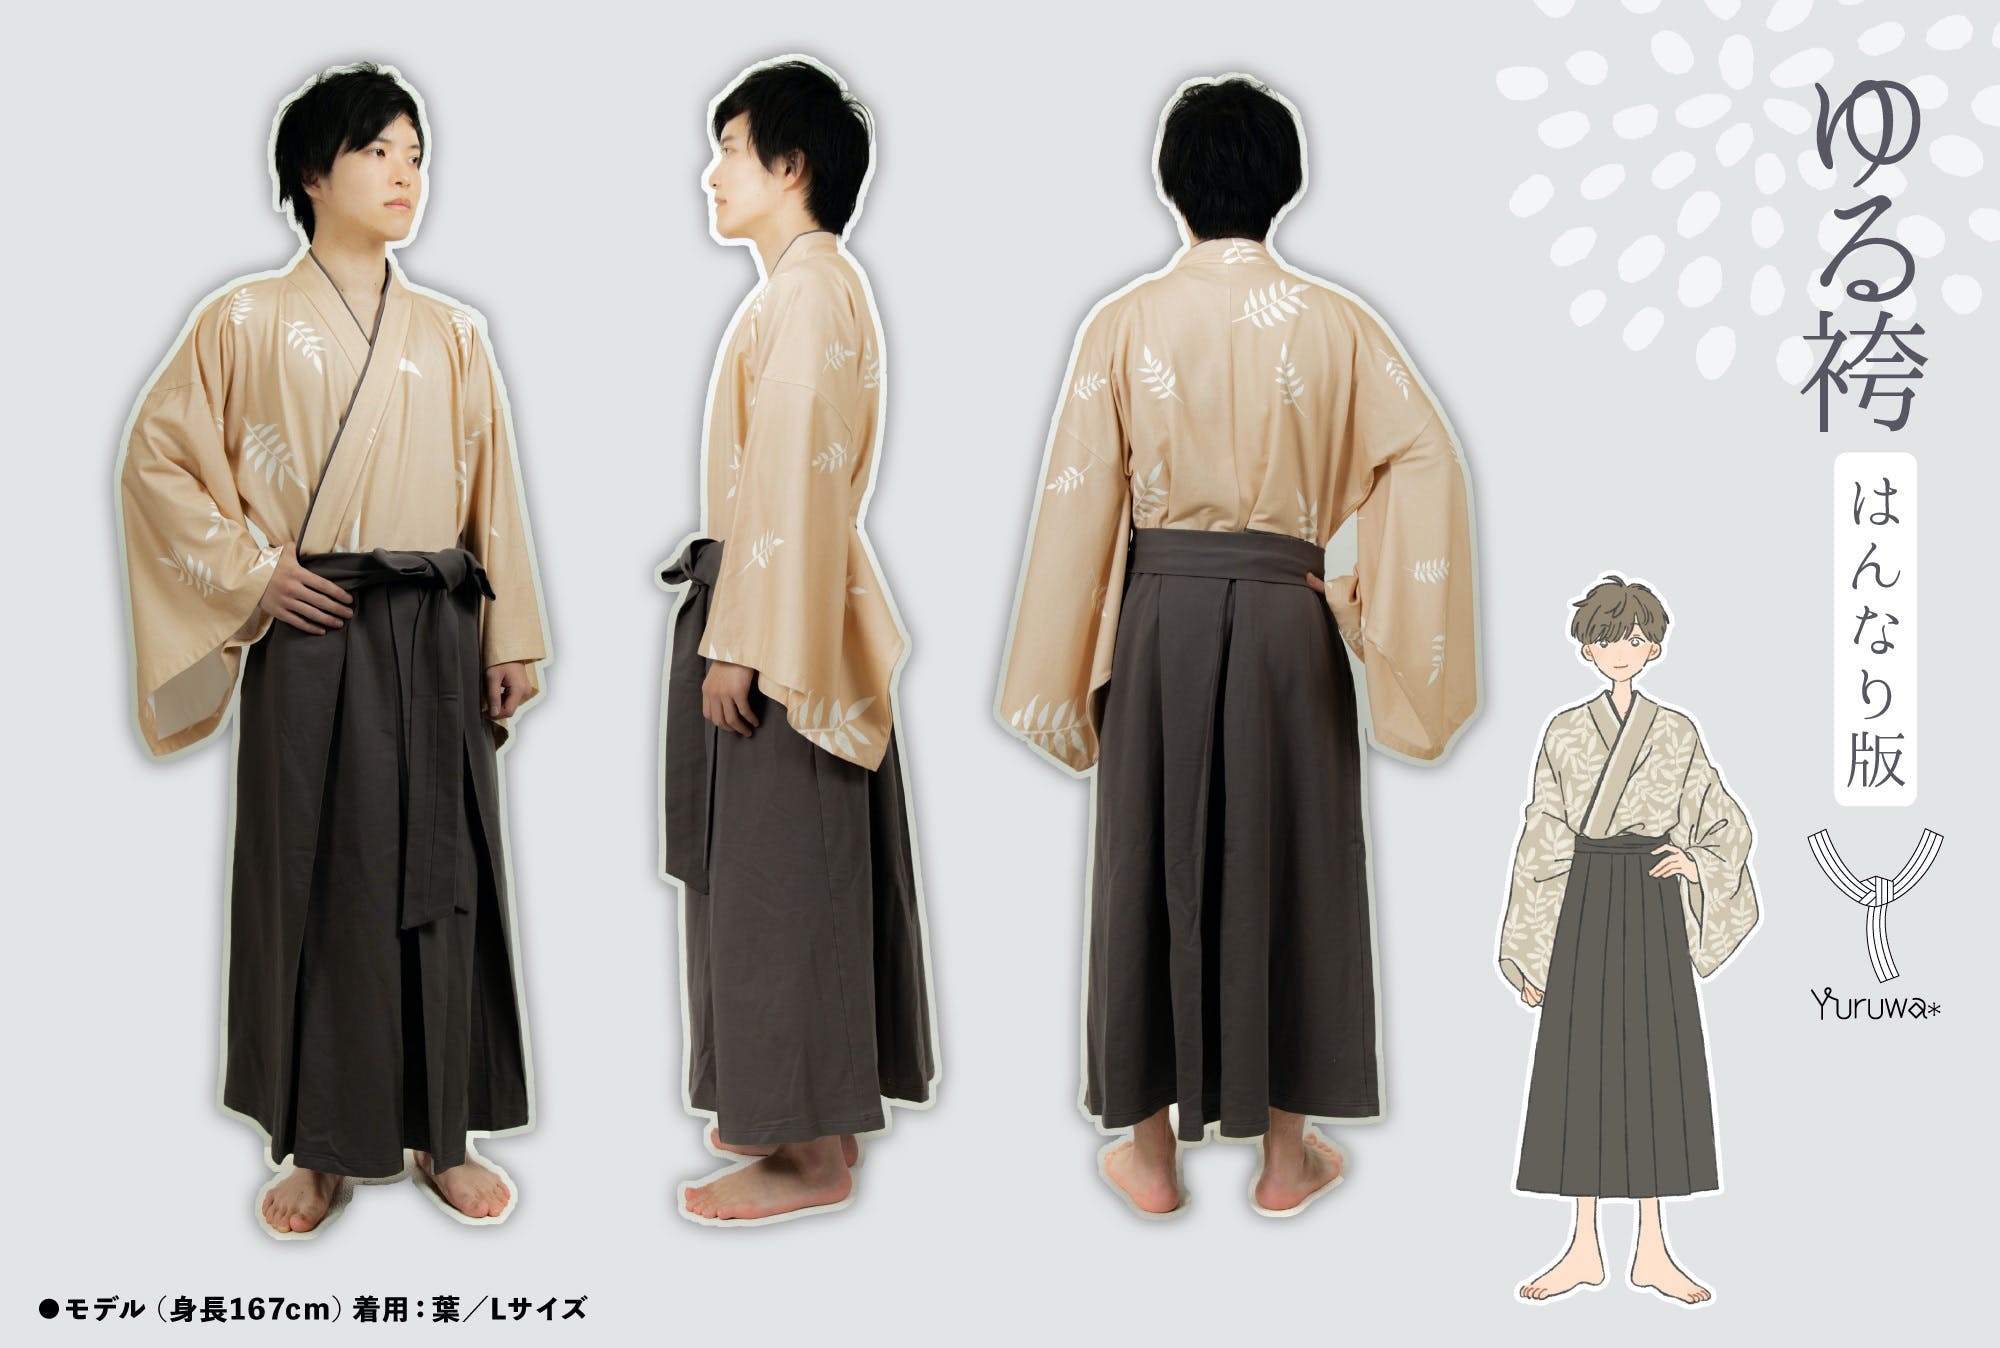 Stay home in style with Kyoto-easy hakama-inspired roomwear for men ...